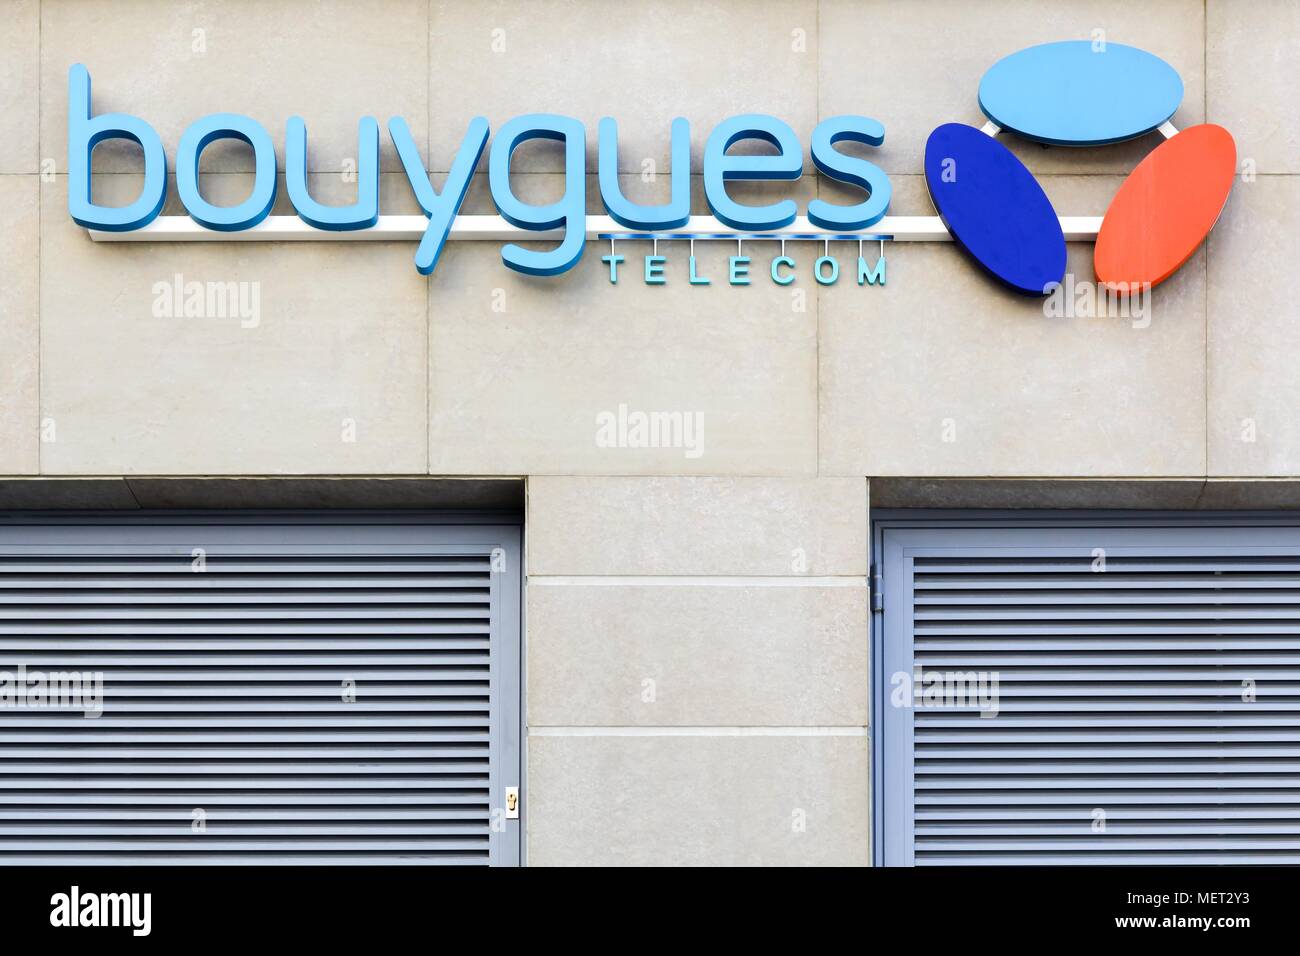 Lyon, France - August 15, 2016: Bouygues Telecom logo on wall of a store.  Bouygues Telecom is a French mobile phone and Internet service provider  Stock Photo - Alamy